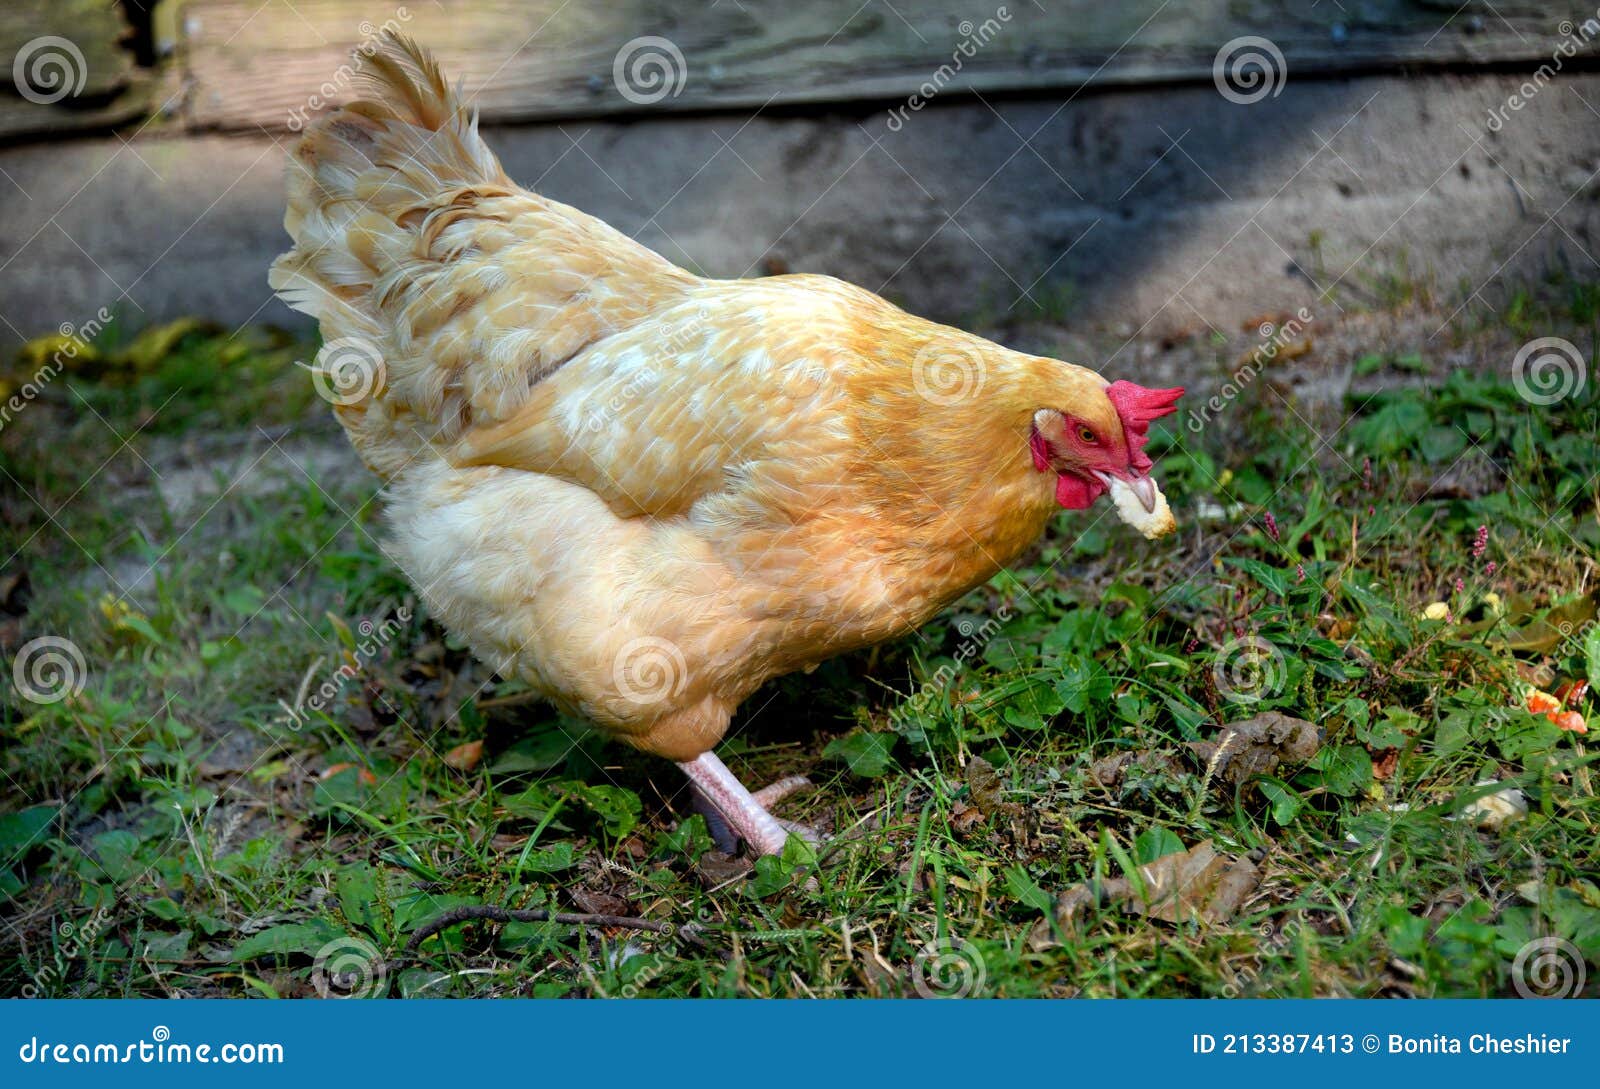 Chicken Gobbles Up Table Scraps Stock Image - Image of chicken, profile:  213387413